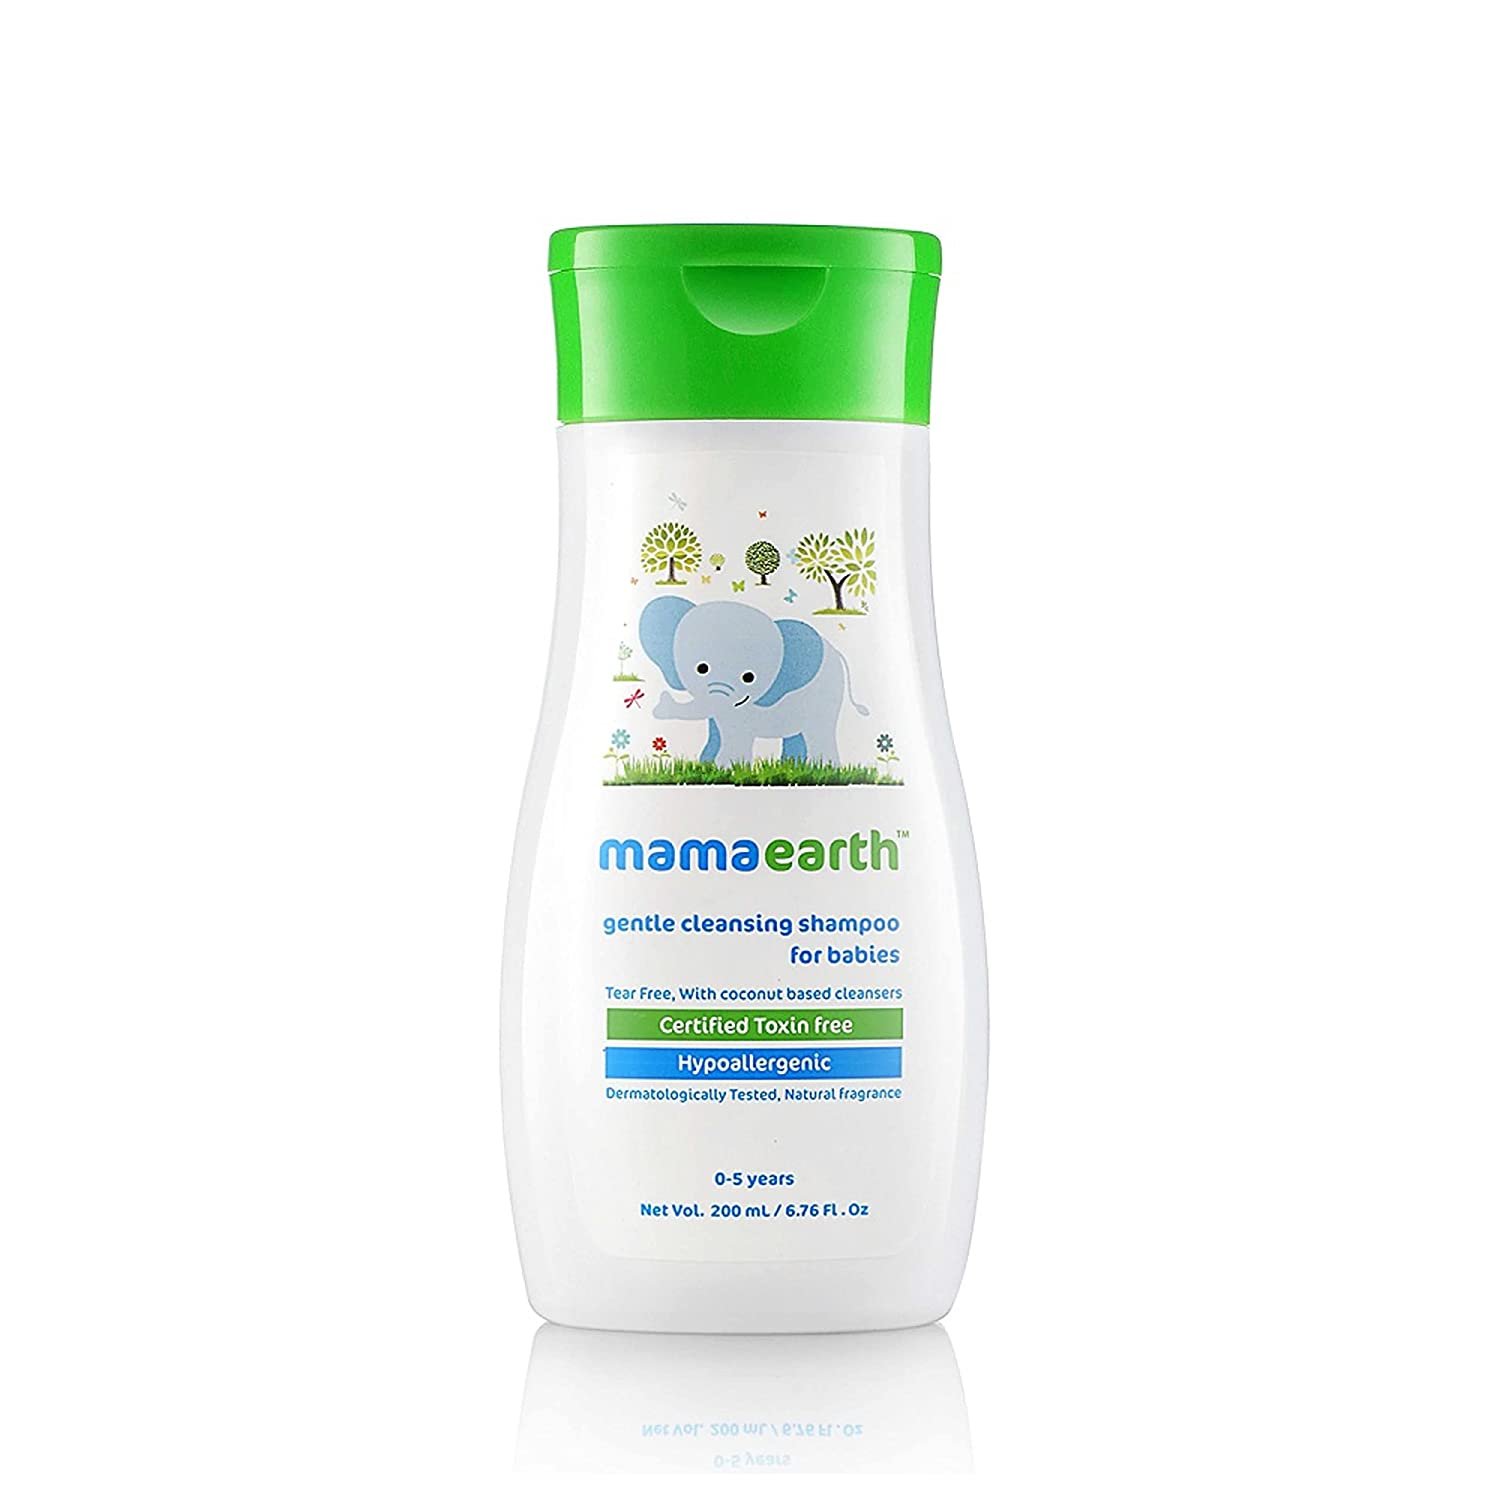 6. Mamaearth Gentle Cleansing Shampoo